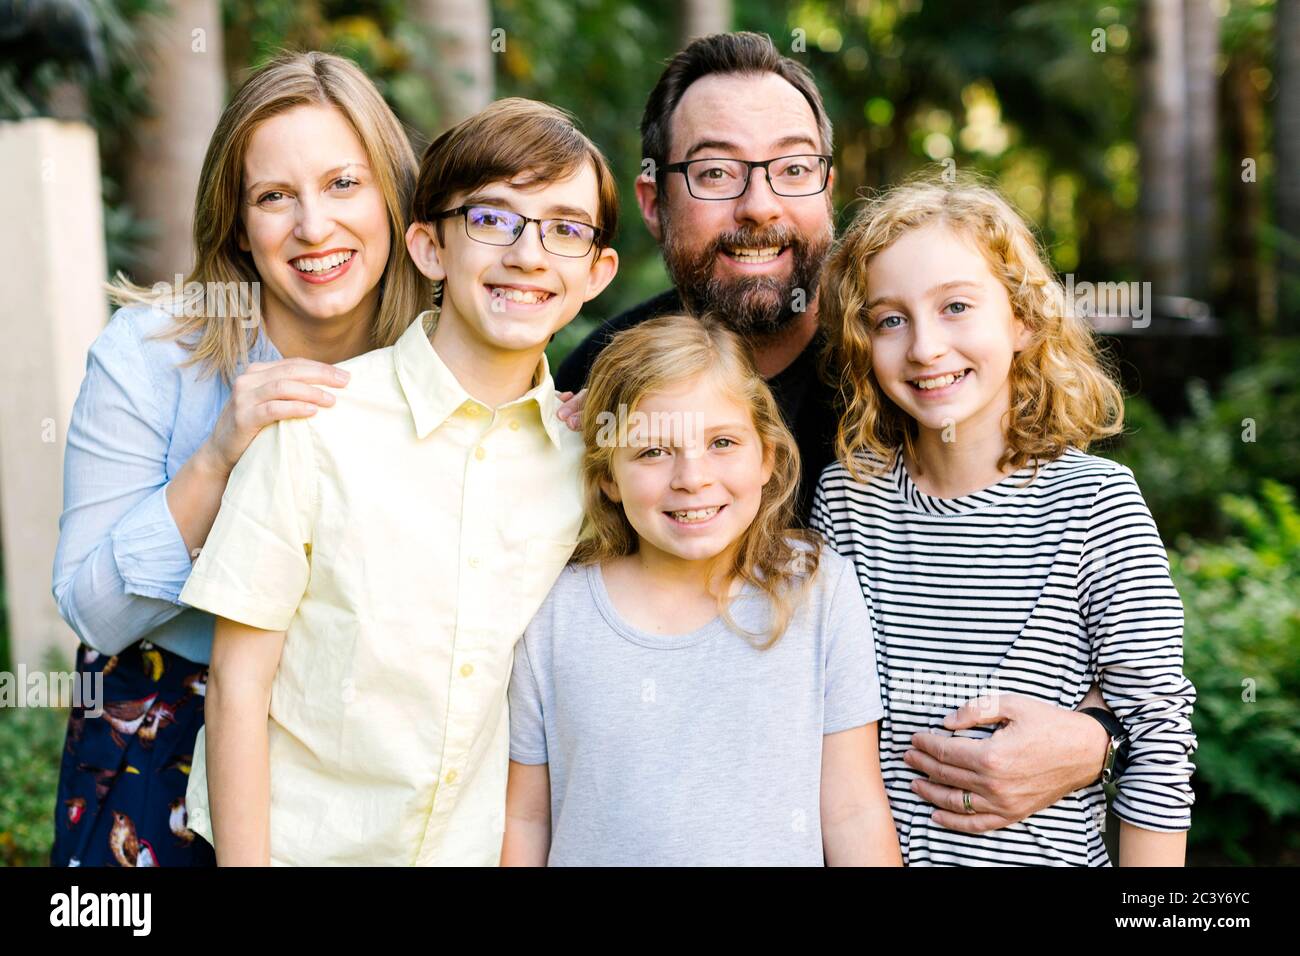 Portrait of family with children (10-11, 12-13, 14-15) Stock Photo